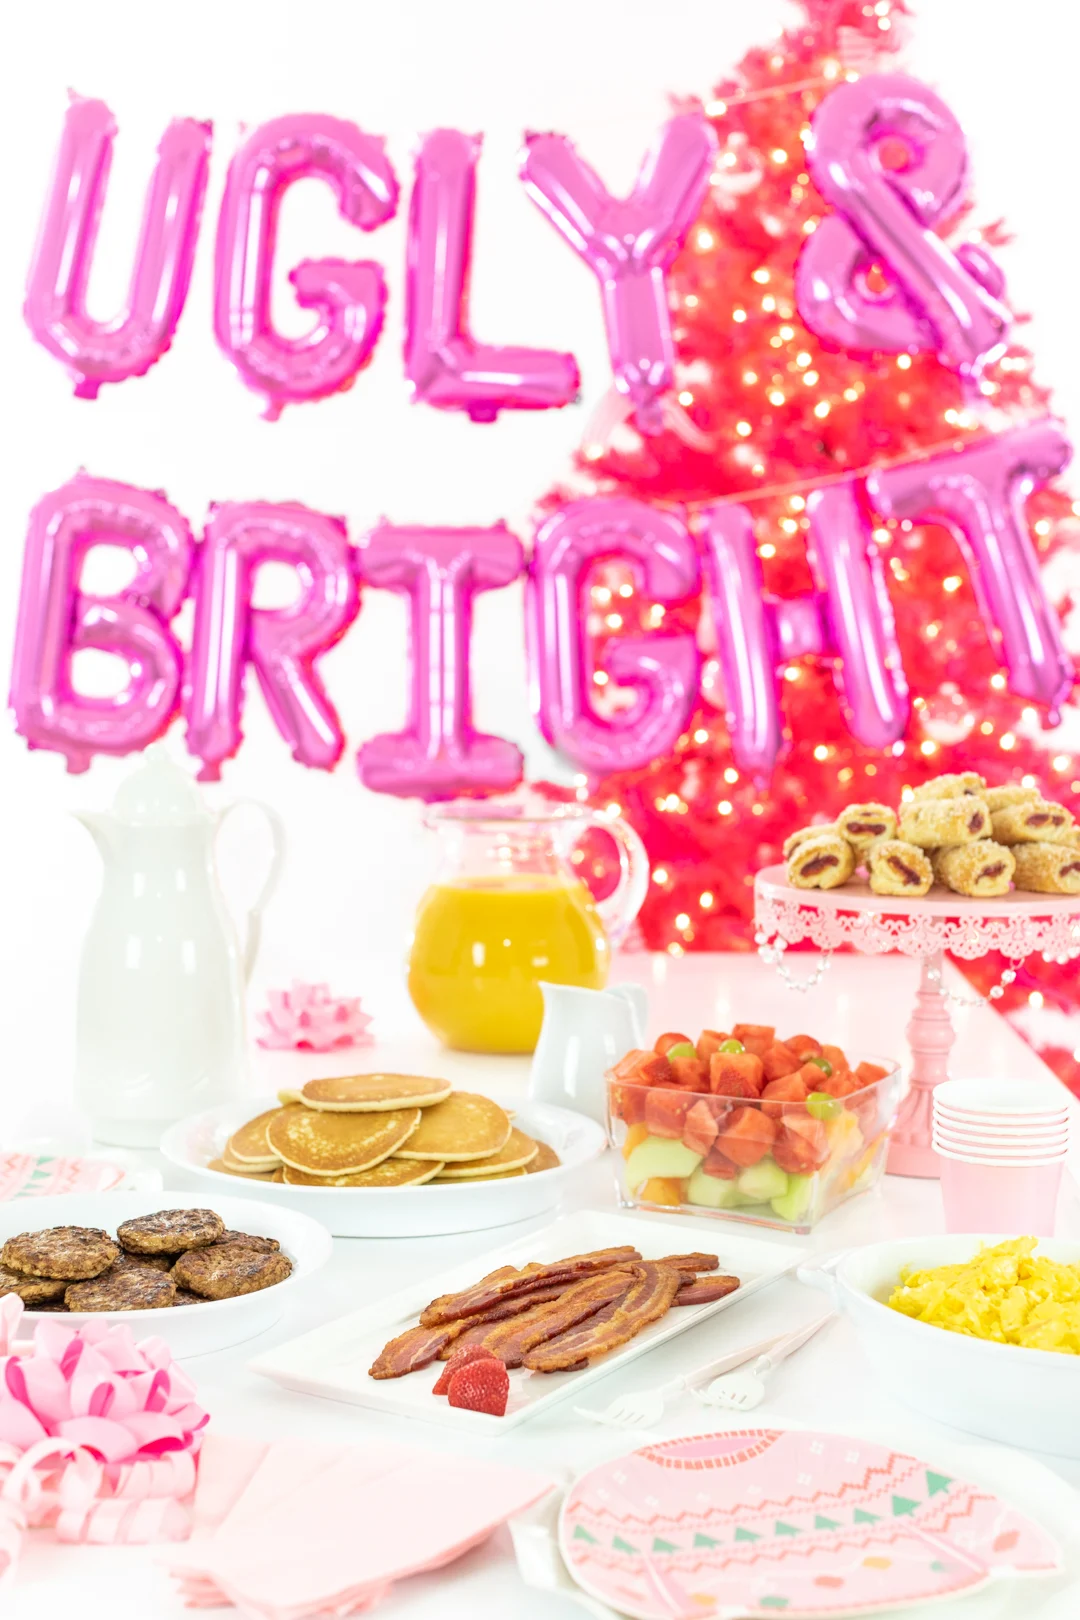 Fun holiday brunch spread with ugly & bright balloons and classic brunch ingredients.